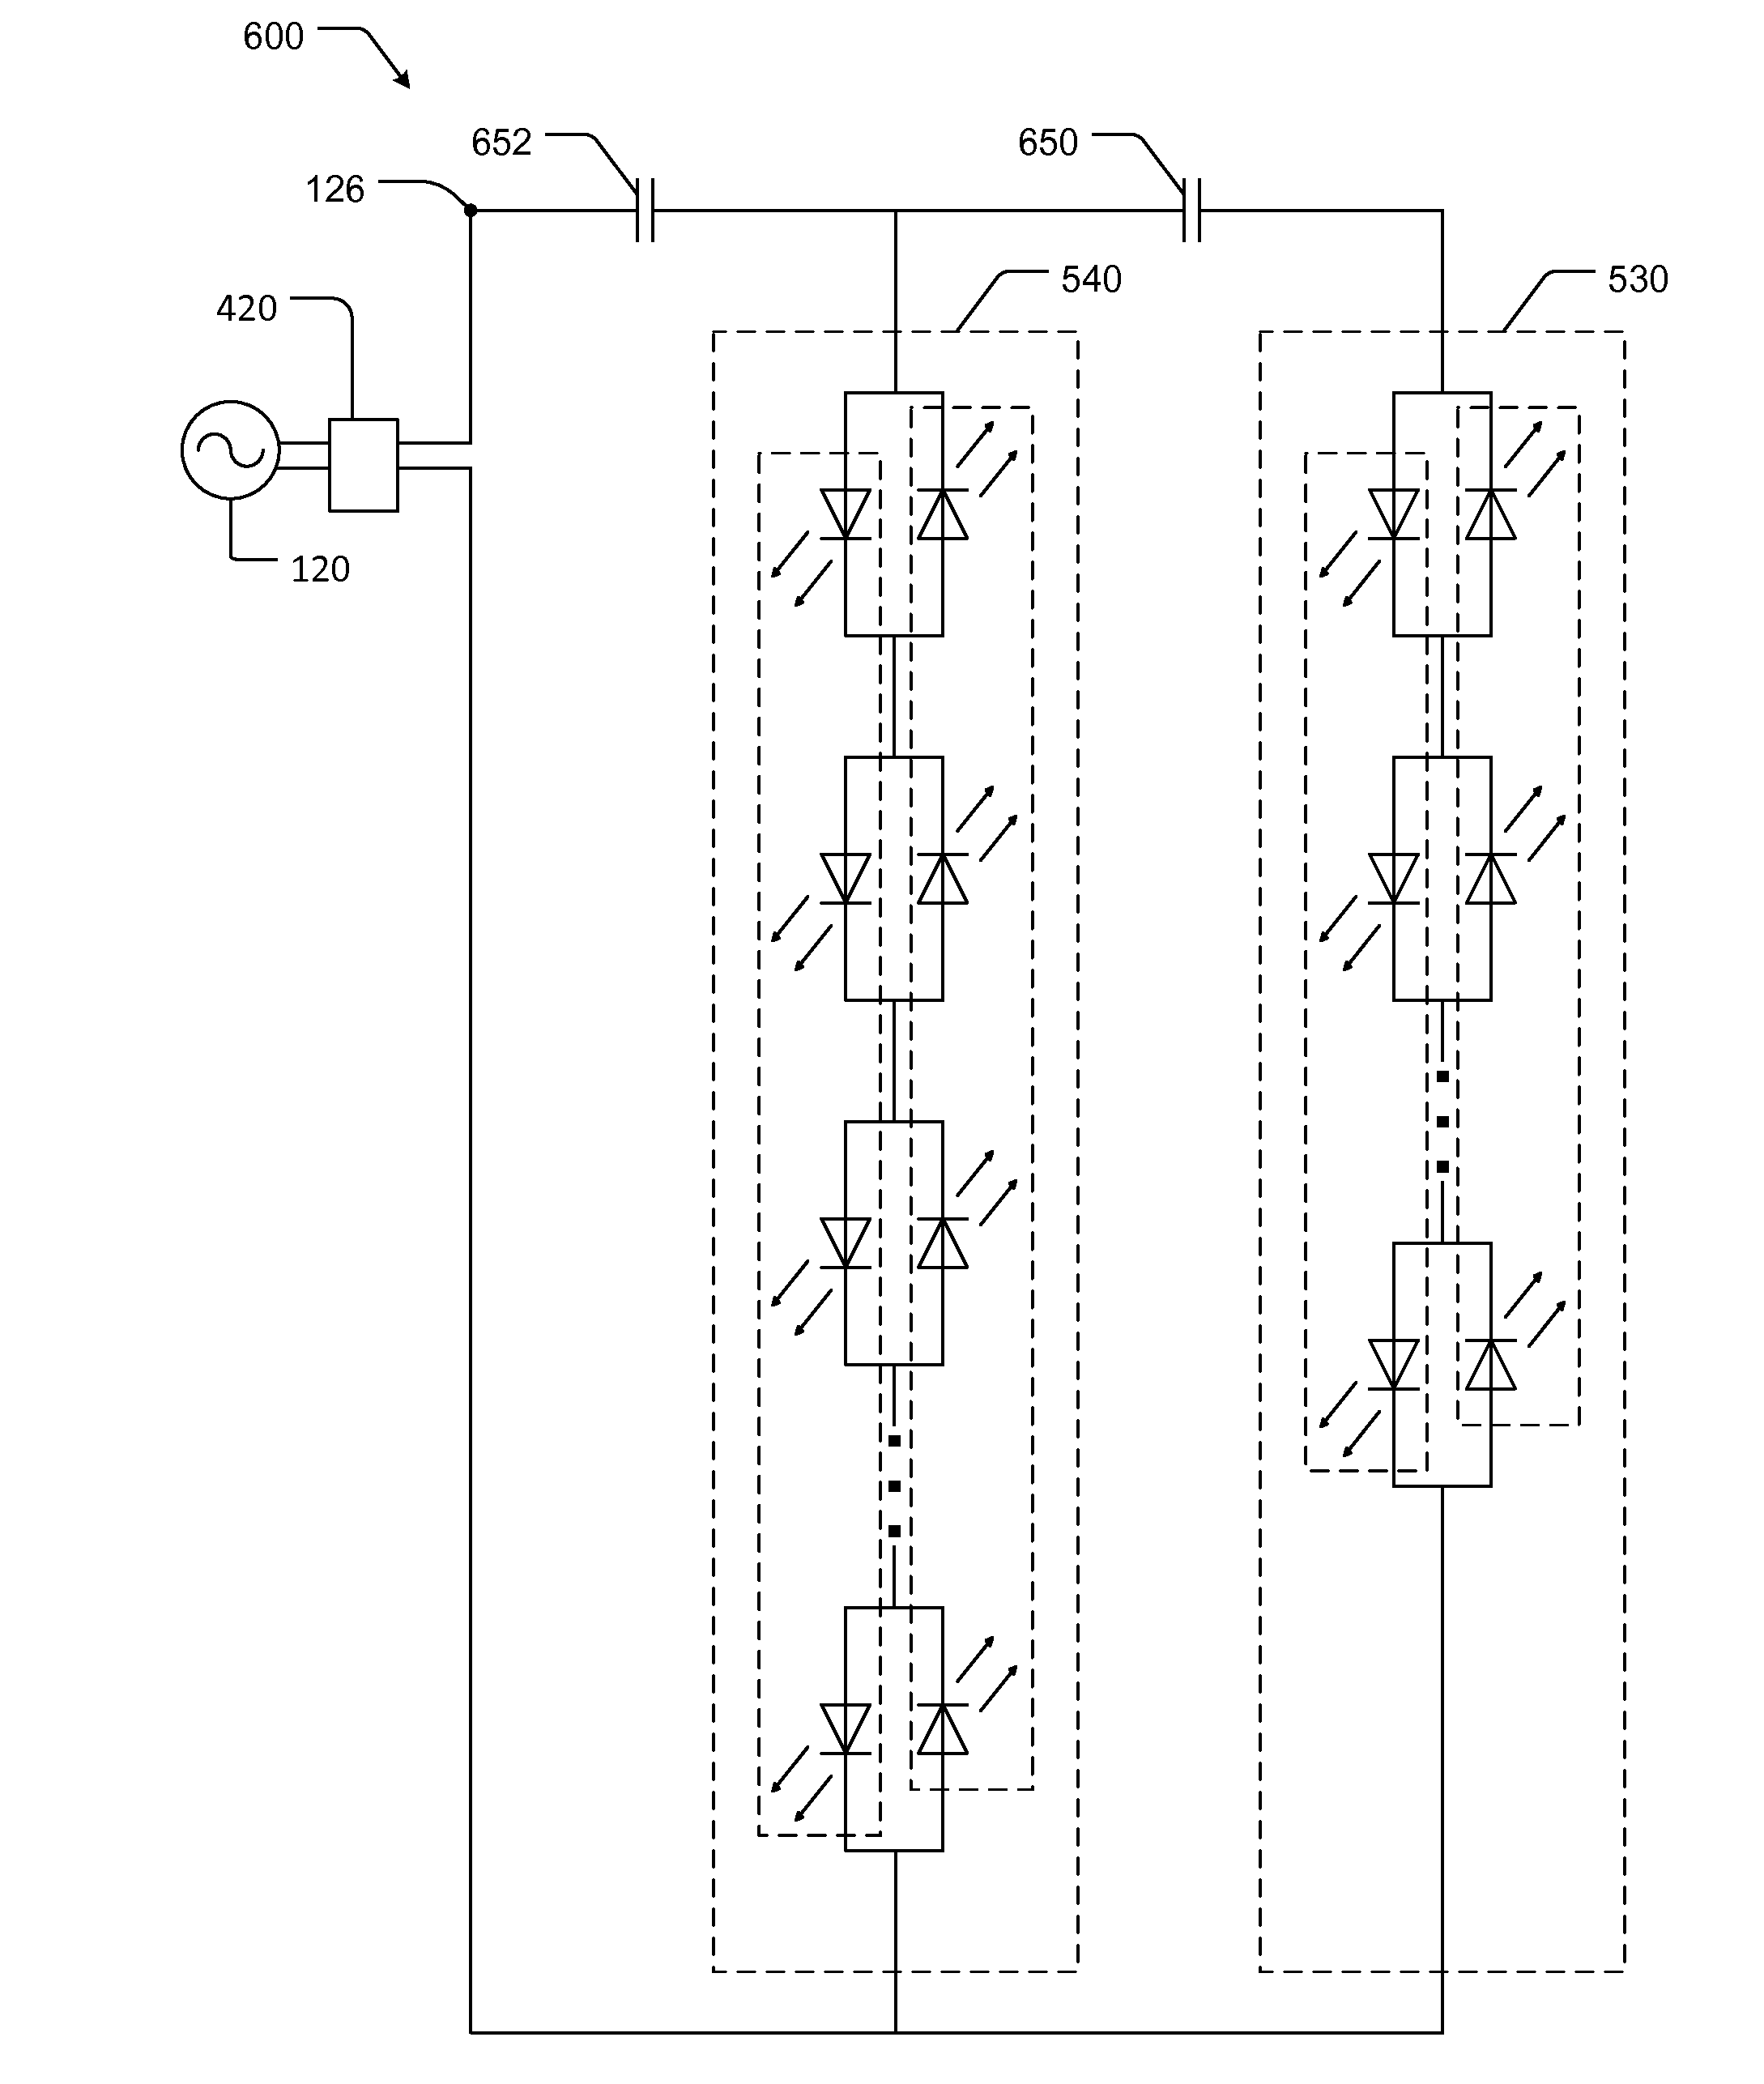 System and method providing LED emulation of incandescent bulb brightness and color response to varying power input and dimmer circuit therefor